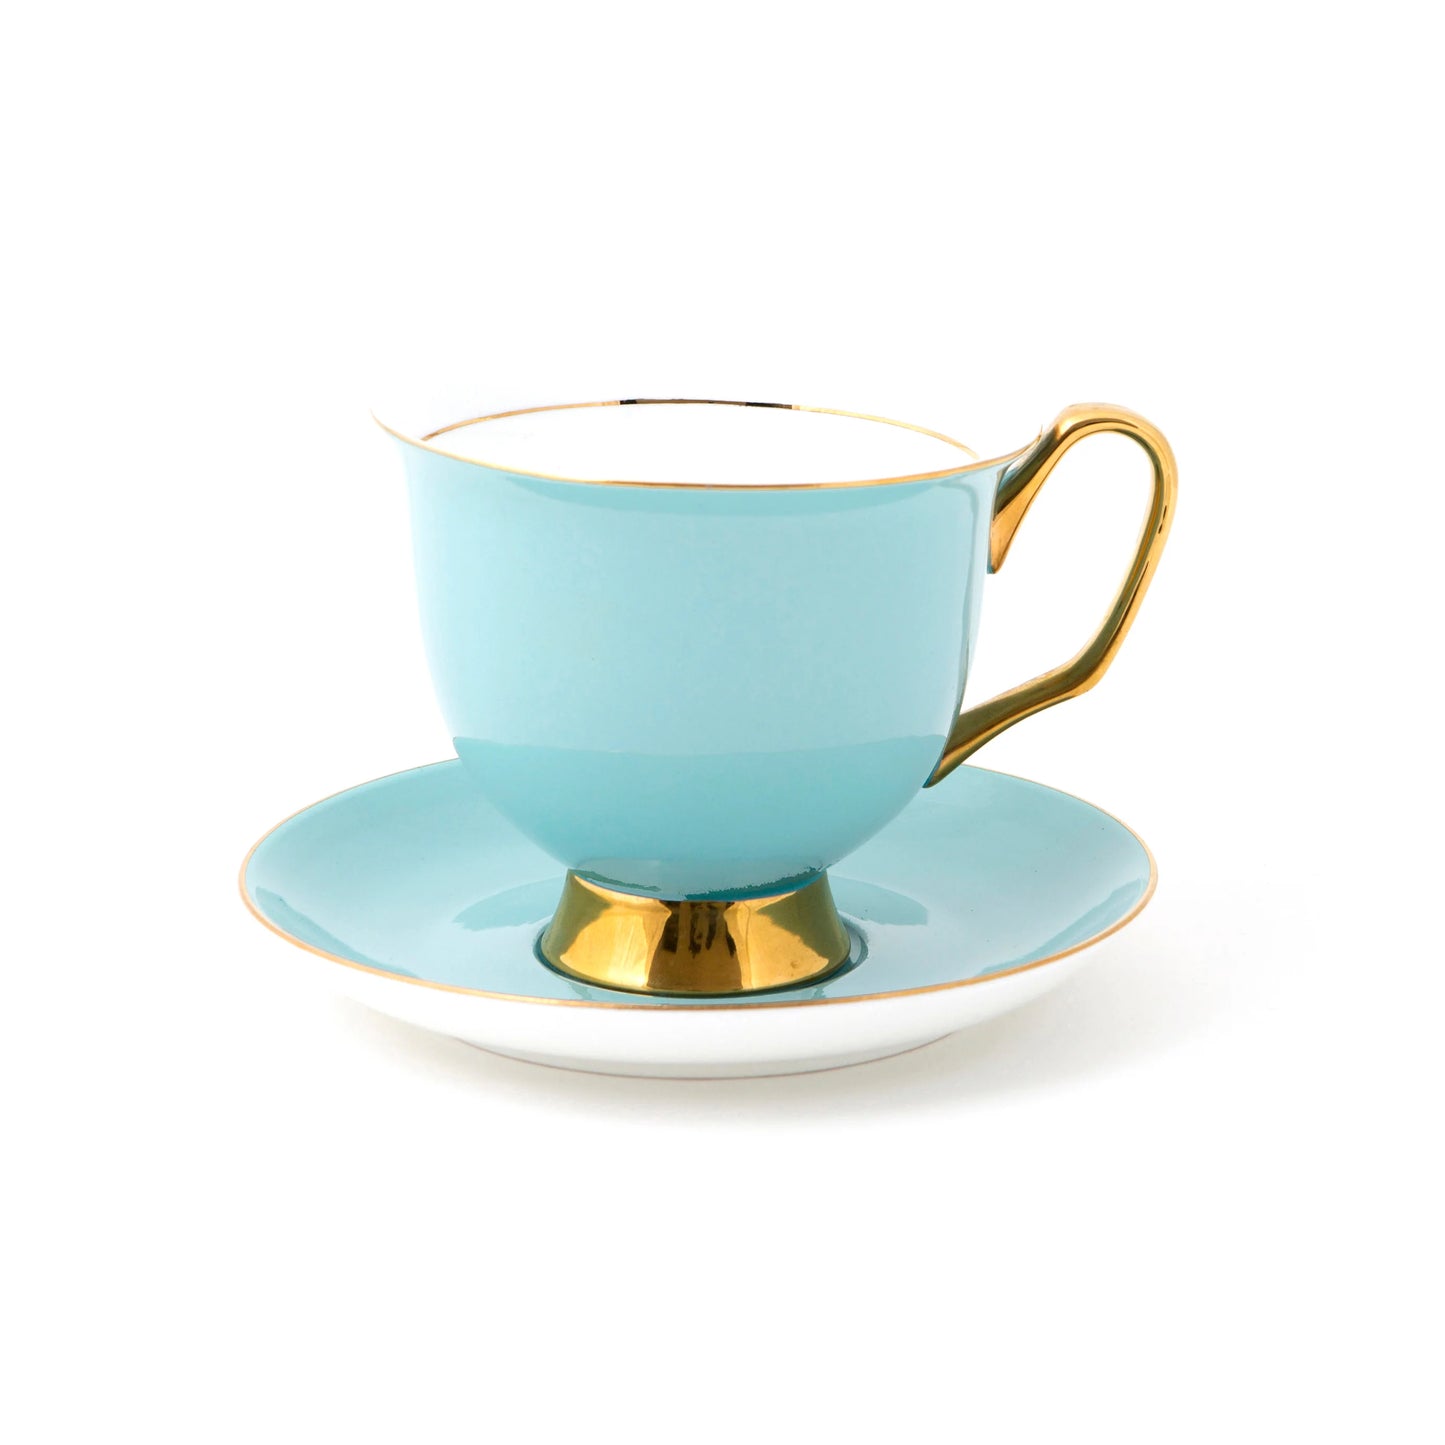 Breakfast at Tiffany's can be an everyday indulgence with this divine duck-egg blue china tea cup and saucer set. You'll feel like a movie star, sipping your favourite tea from this elegant set, hand painted on new fine china. Kiln fired five times for a diamond-strong finish, this is a tea cup that you'll love to use for years to come. While it appears delicate, this tea cup is designed for everyday use and is strong enough to last generations.